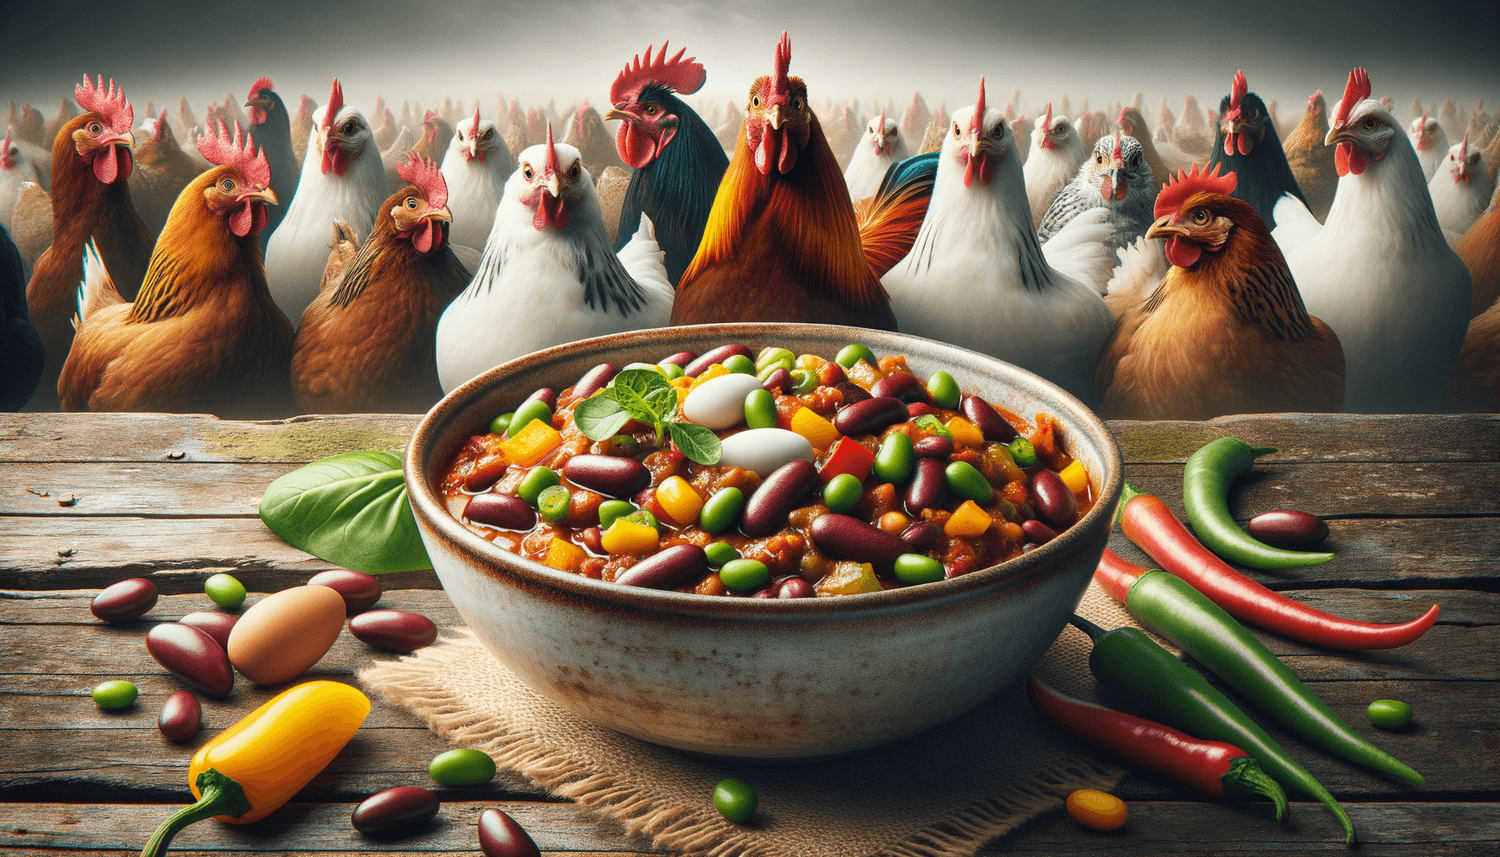 Can Chickens Eat Leftover Chili?